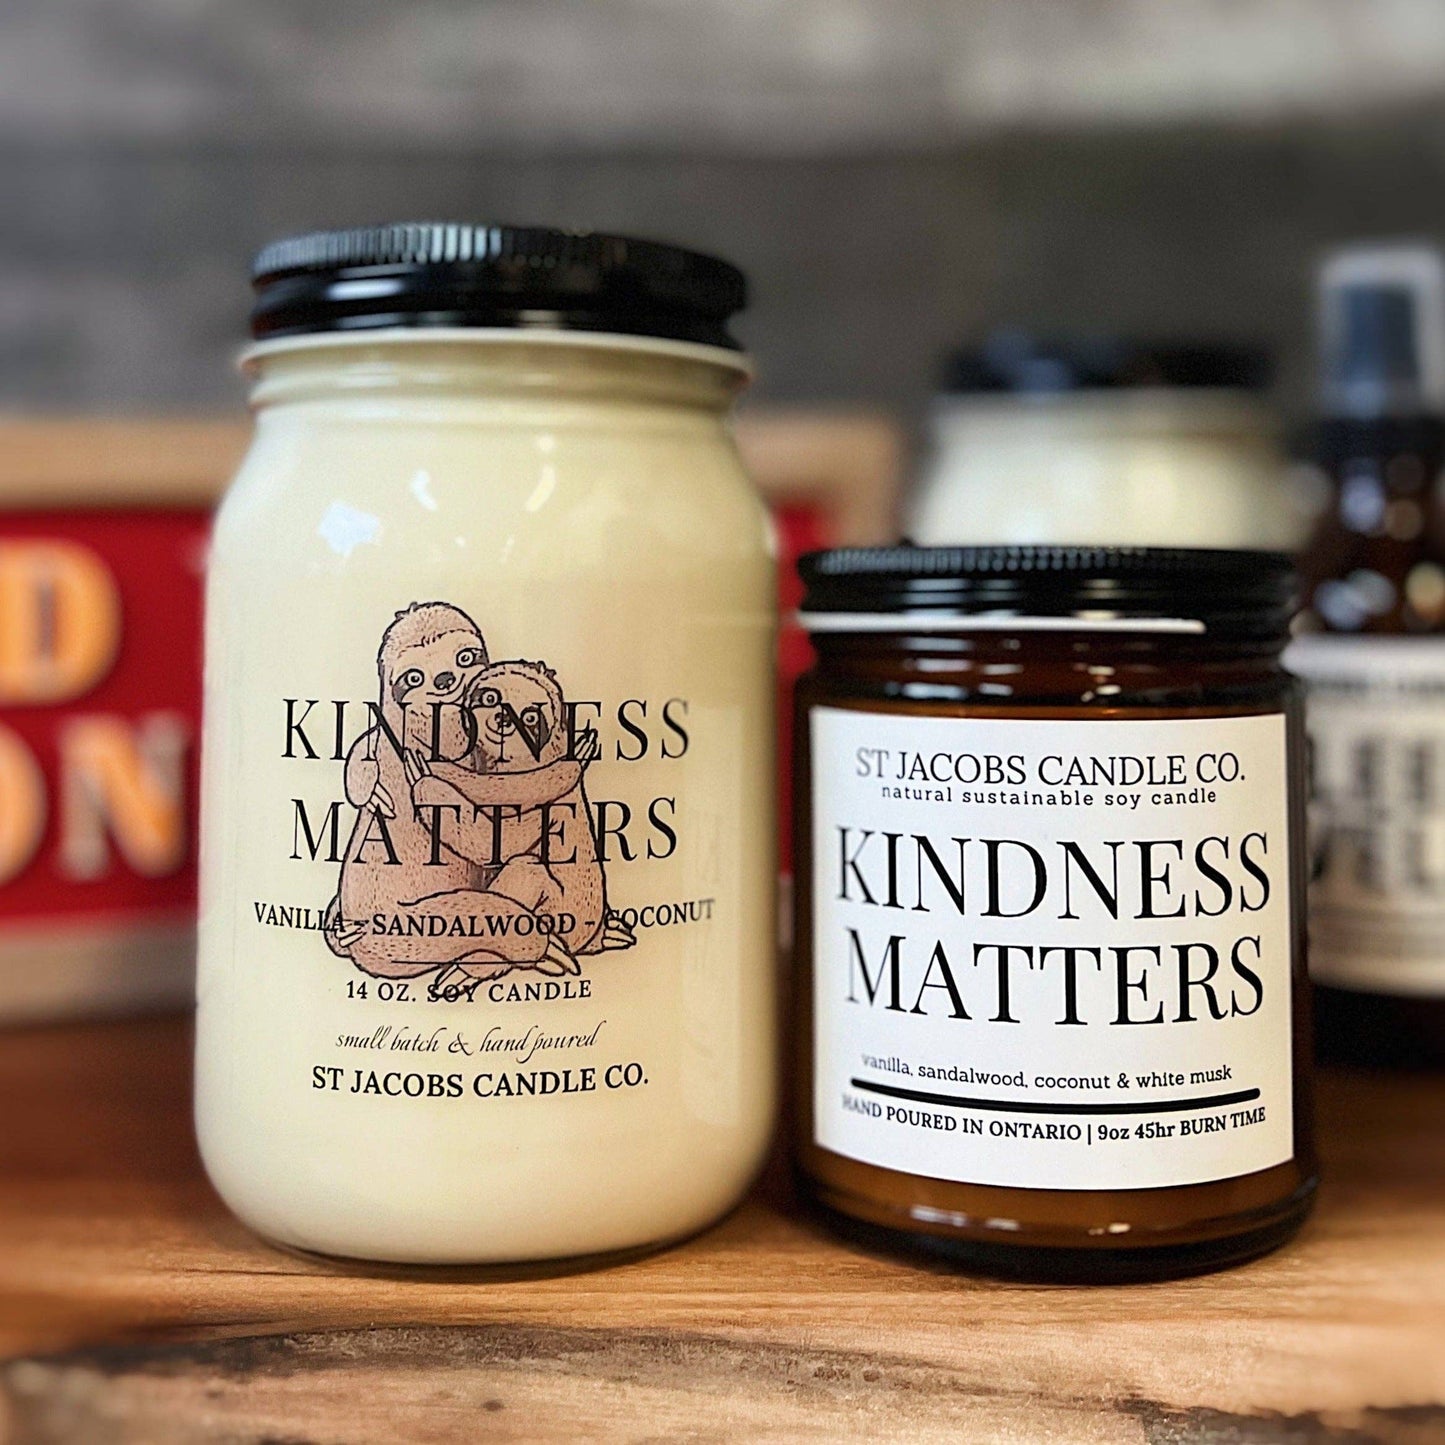 St Jacobs Candle Co. - "KINDNESS MATTERS" Natural Soy Candle